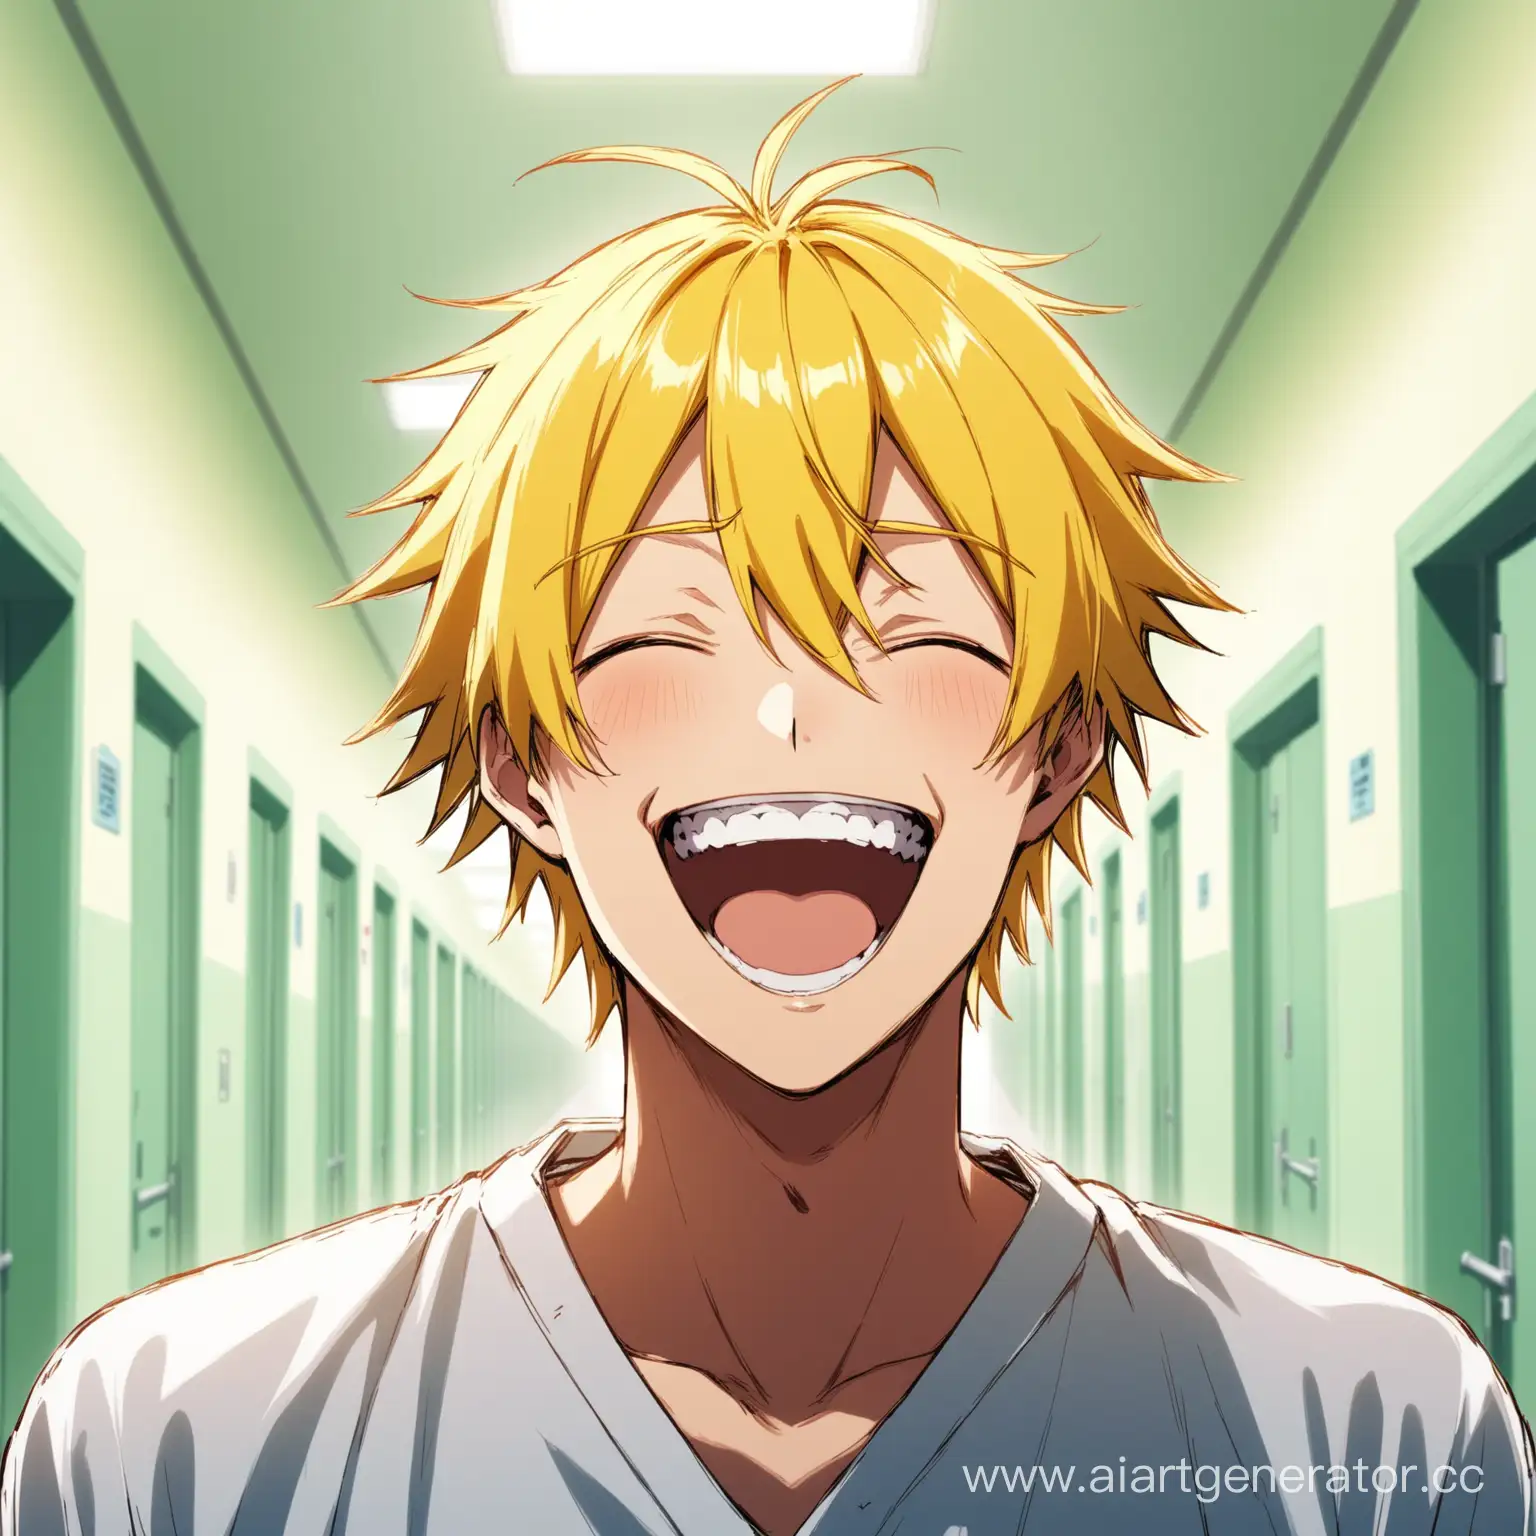 Joyful-Anime-Character-with-Bright-Yellow-Hair-in-a-Psychiatric-Hospital